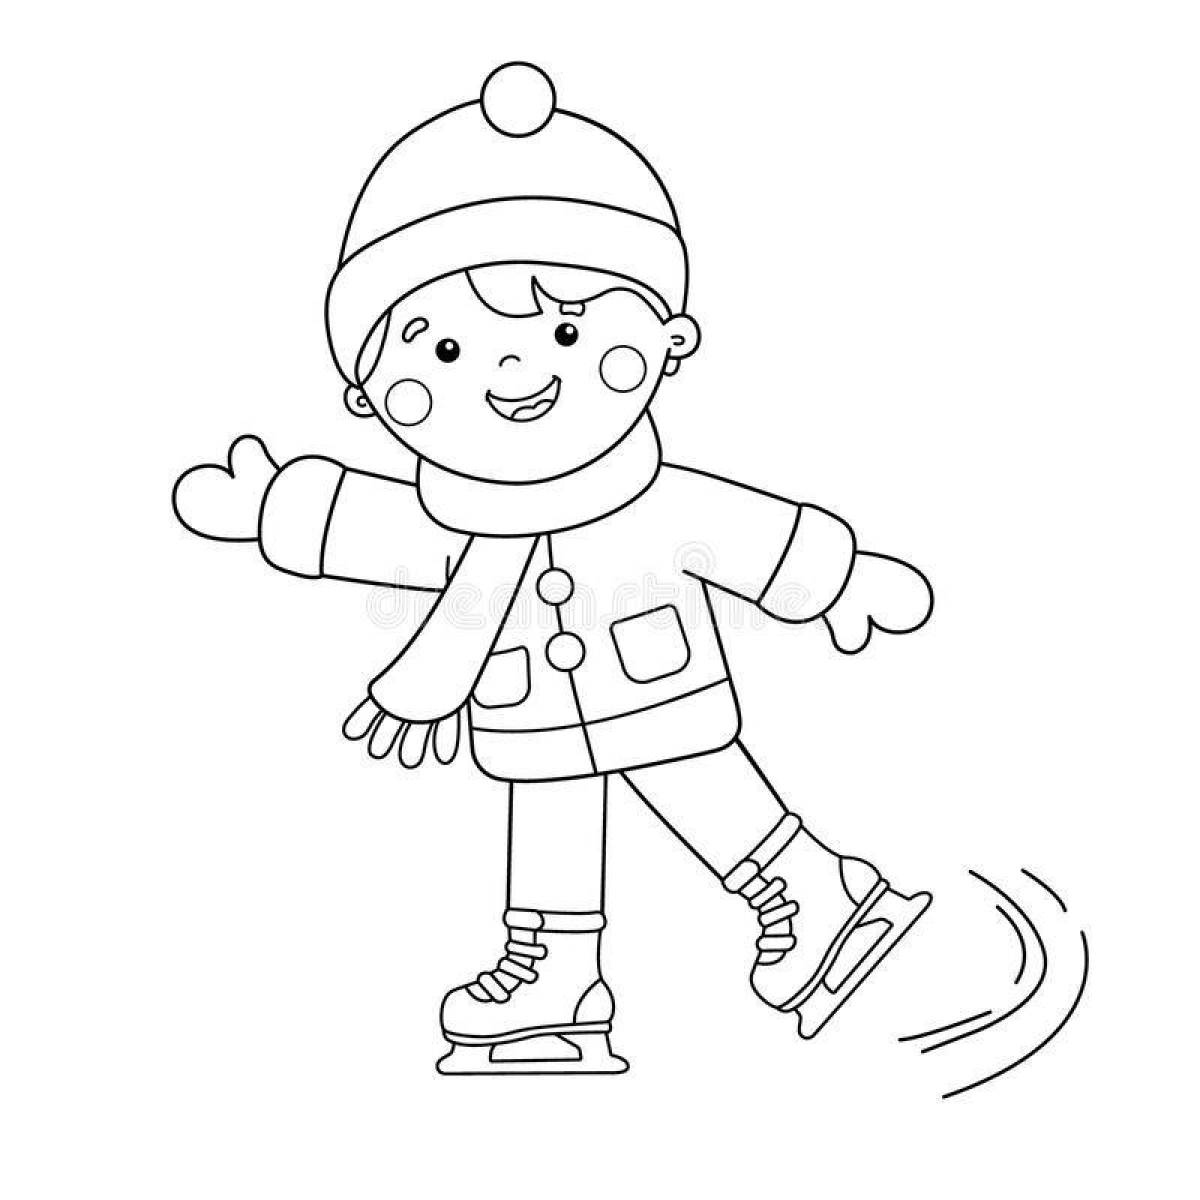 Animated winter sports coloring book for 5-6 year olds